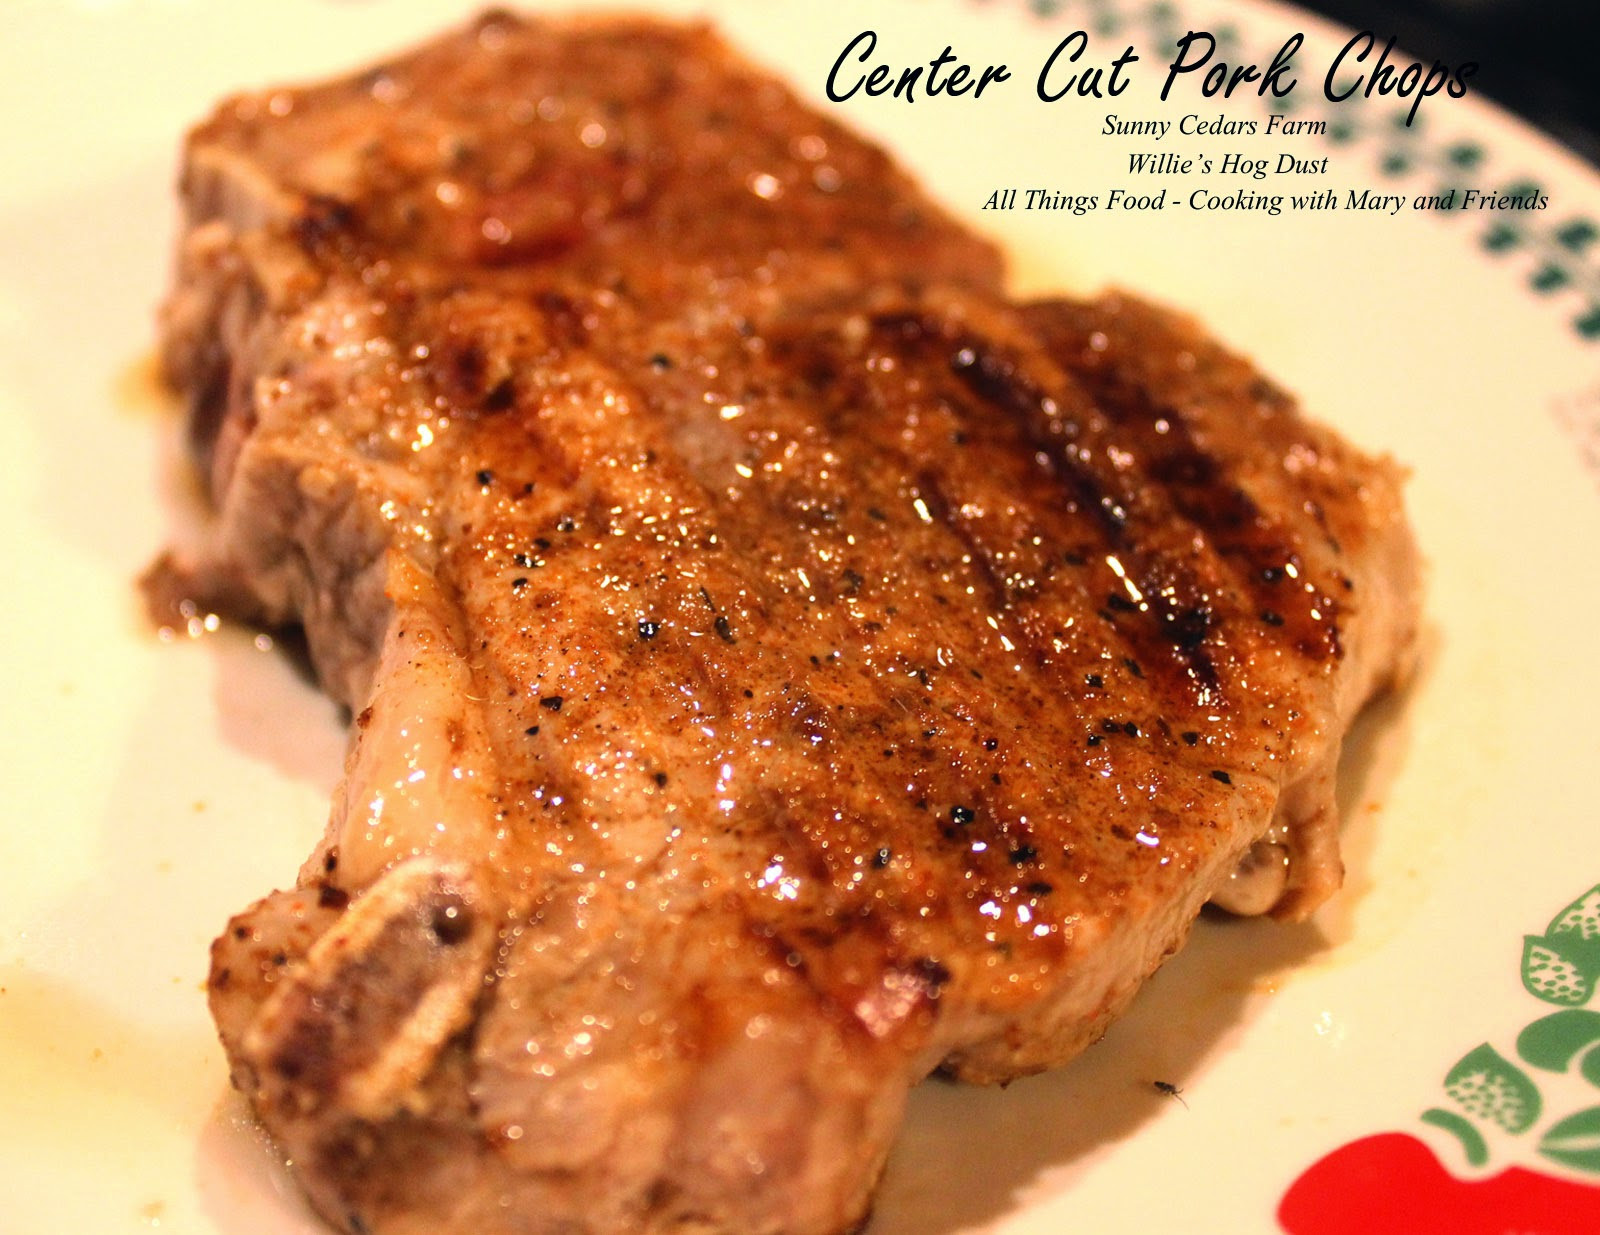 How To Cook Center Cut Pork Chops
 Cooking With Mary and Friends Grilled Center Cut Pork Chops